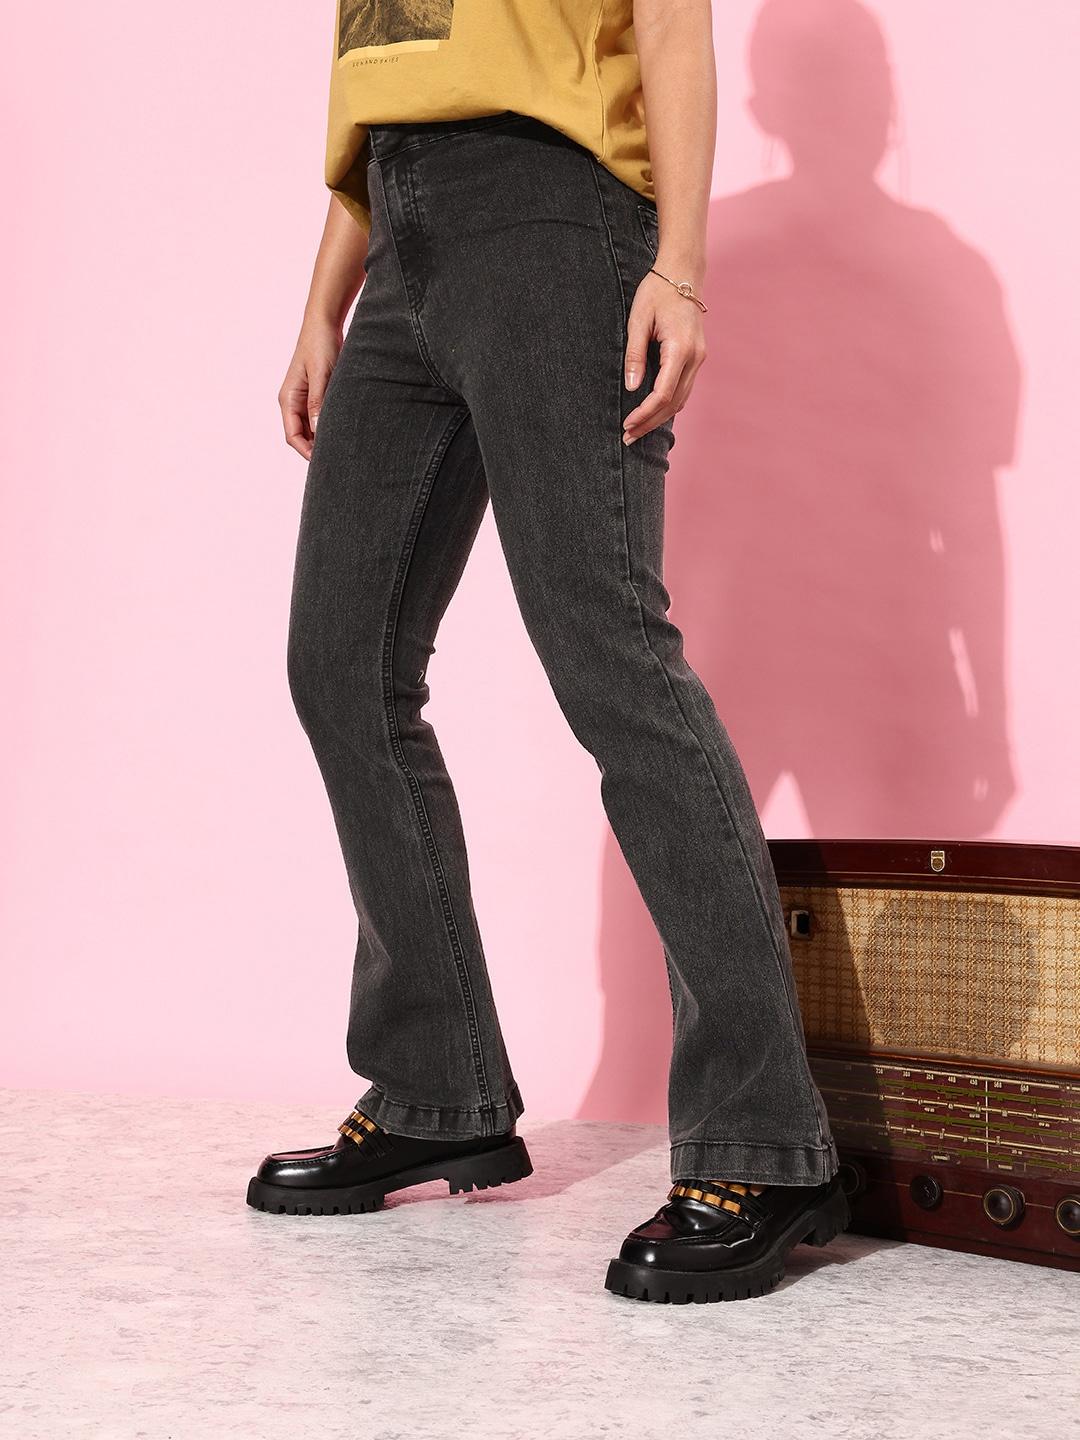 the-roadster-life-co.-women-jet-black-vacay-chill-rodeo-bootcuts-high-rise-denim-jeggings